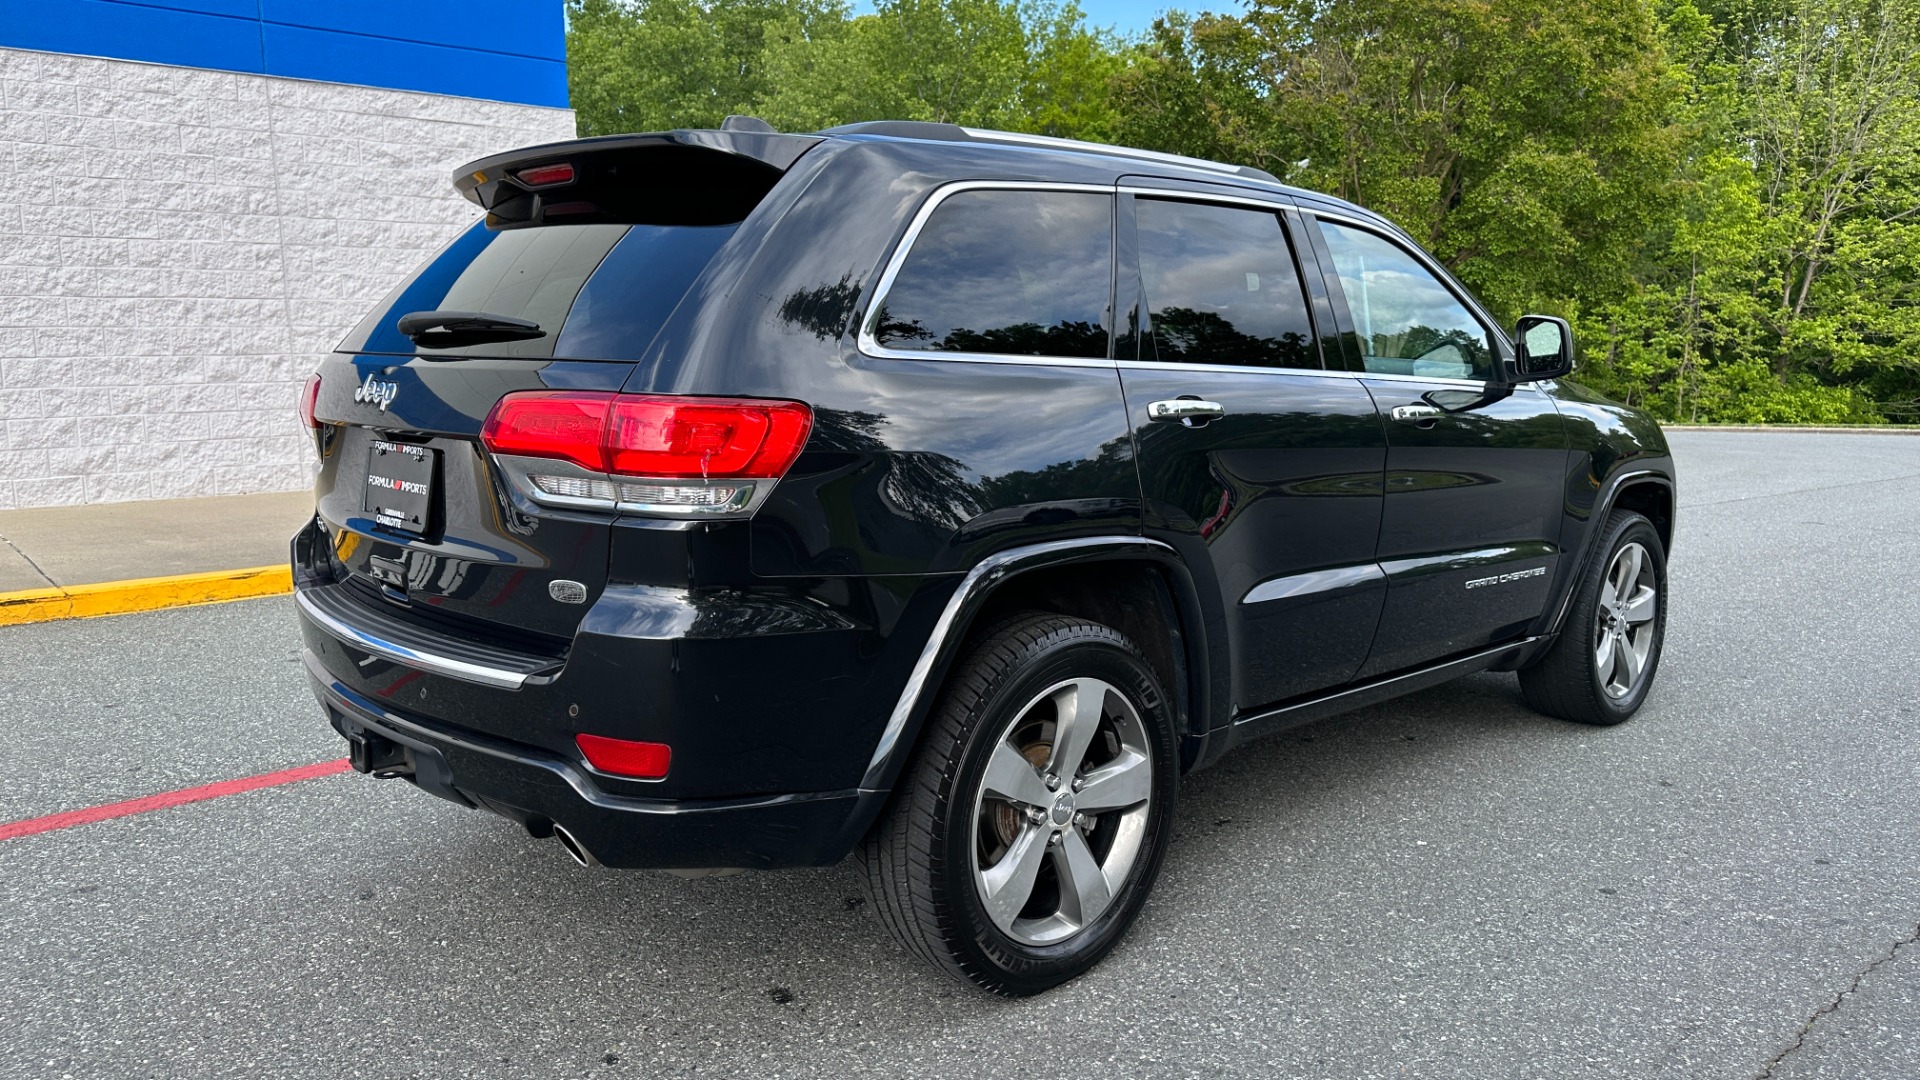 Used 2016 Jeep Grand Cherokee OVERLAND / 5.7L V8 ENGINE / 4WD / HARMAN KARDON for sale $24,495 at Formula Imports in Charlotte NC 28227 4